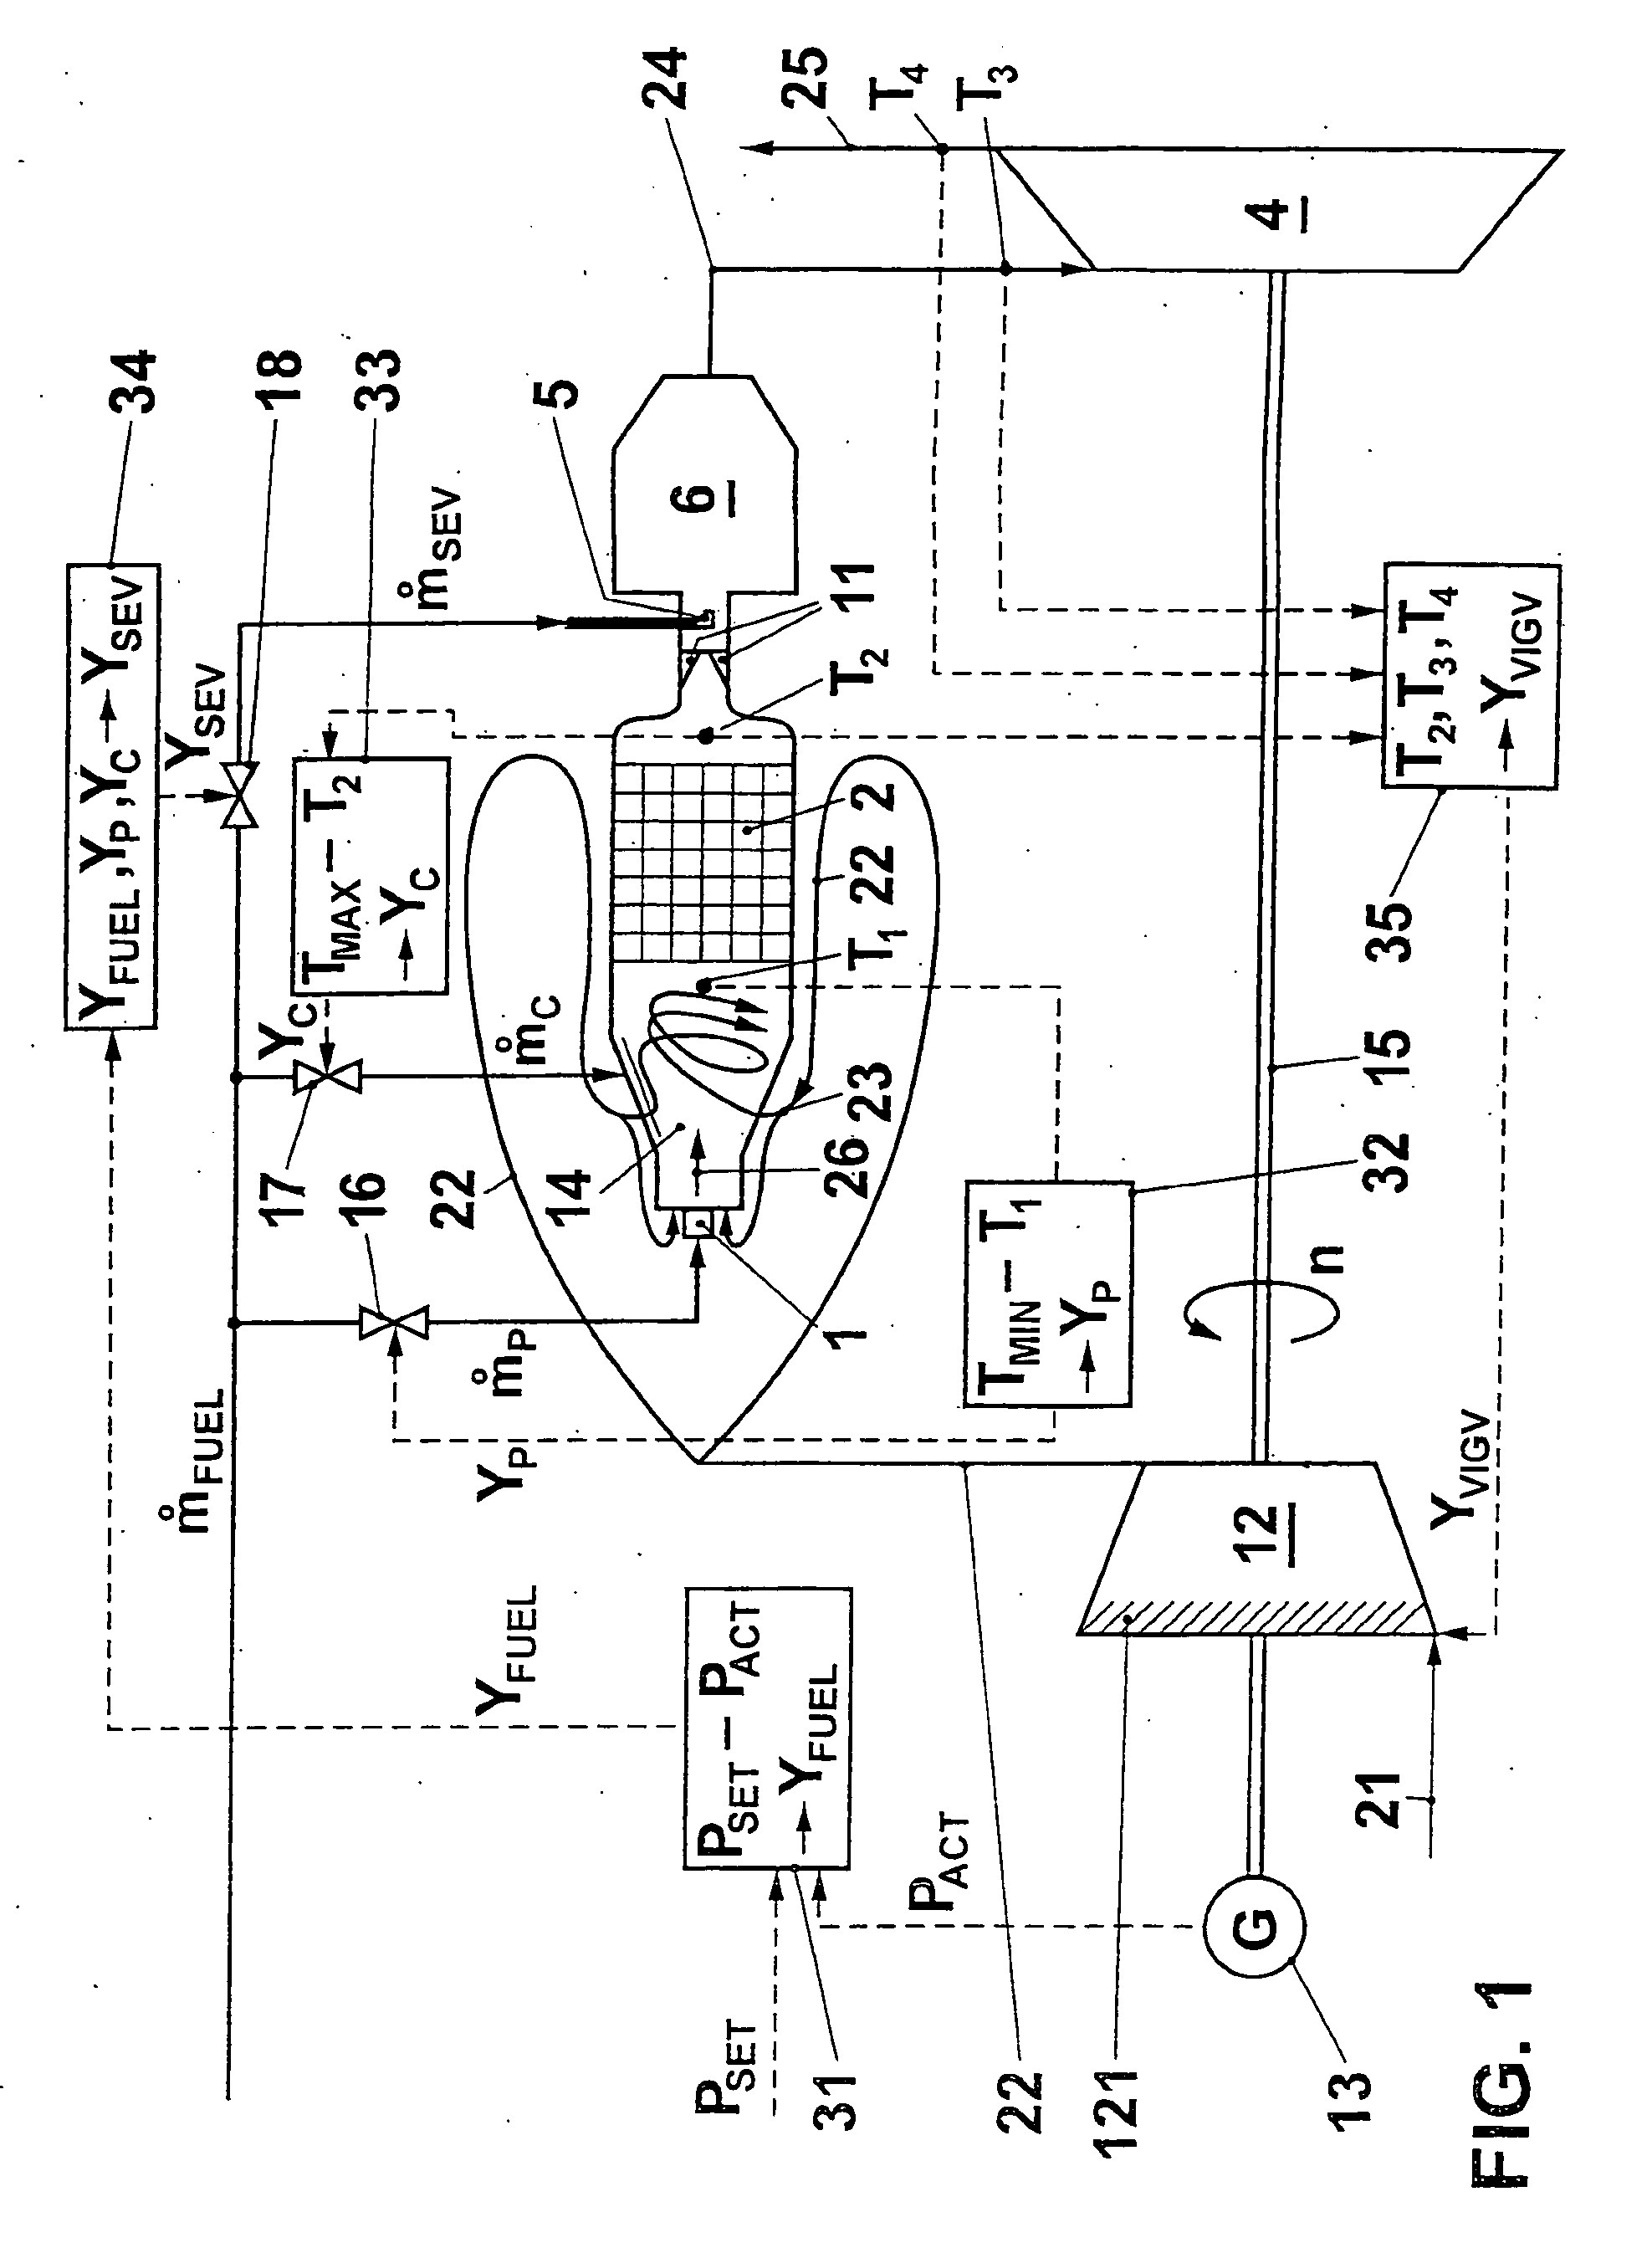 Method for operating a gas turbo group